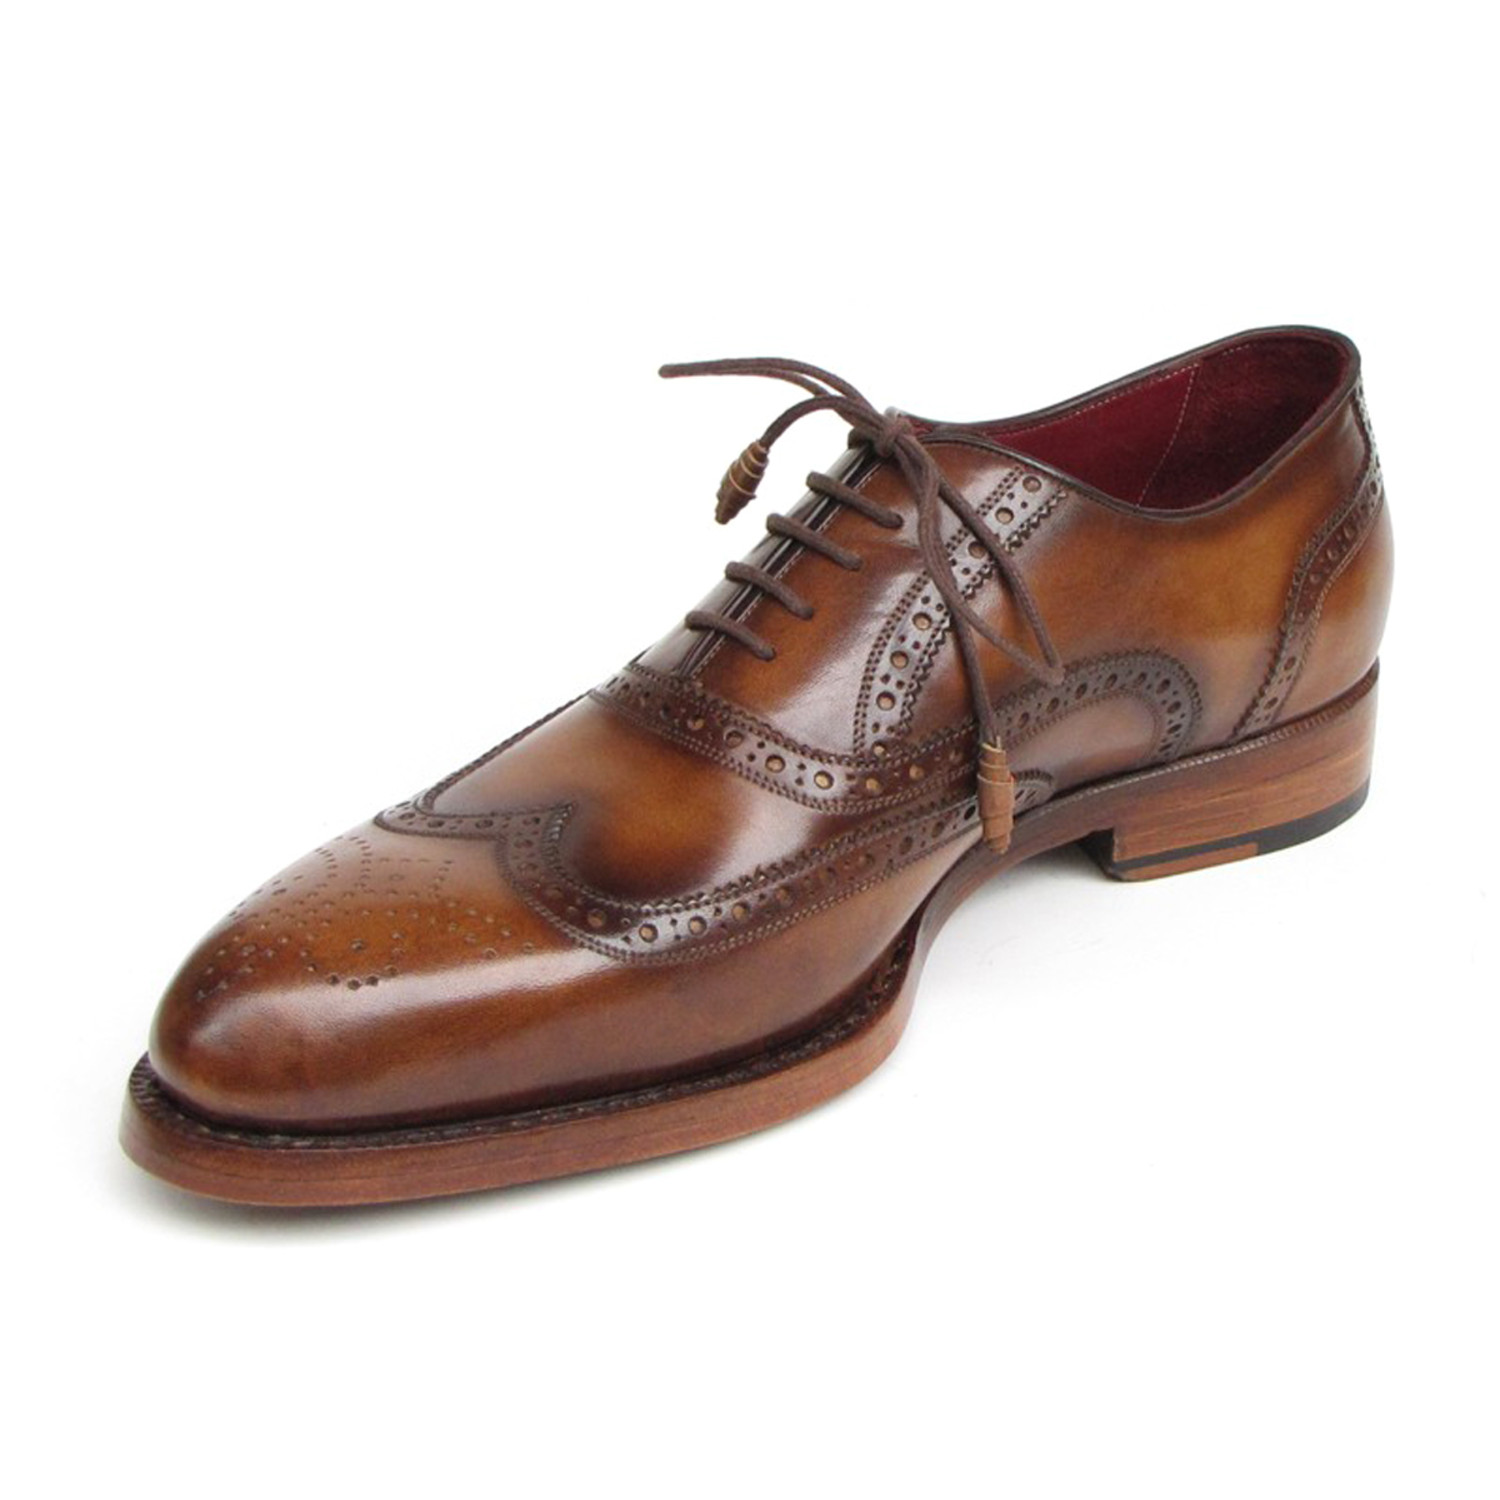 Goodyear Welted Wingtip Oxford (Euro: 40) - Paul Parkman - Touch of Modern